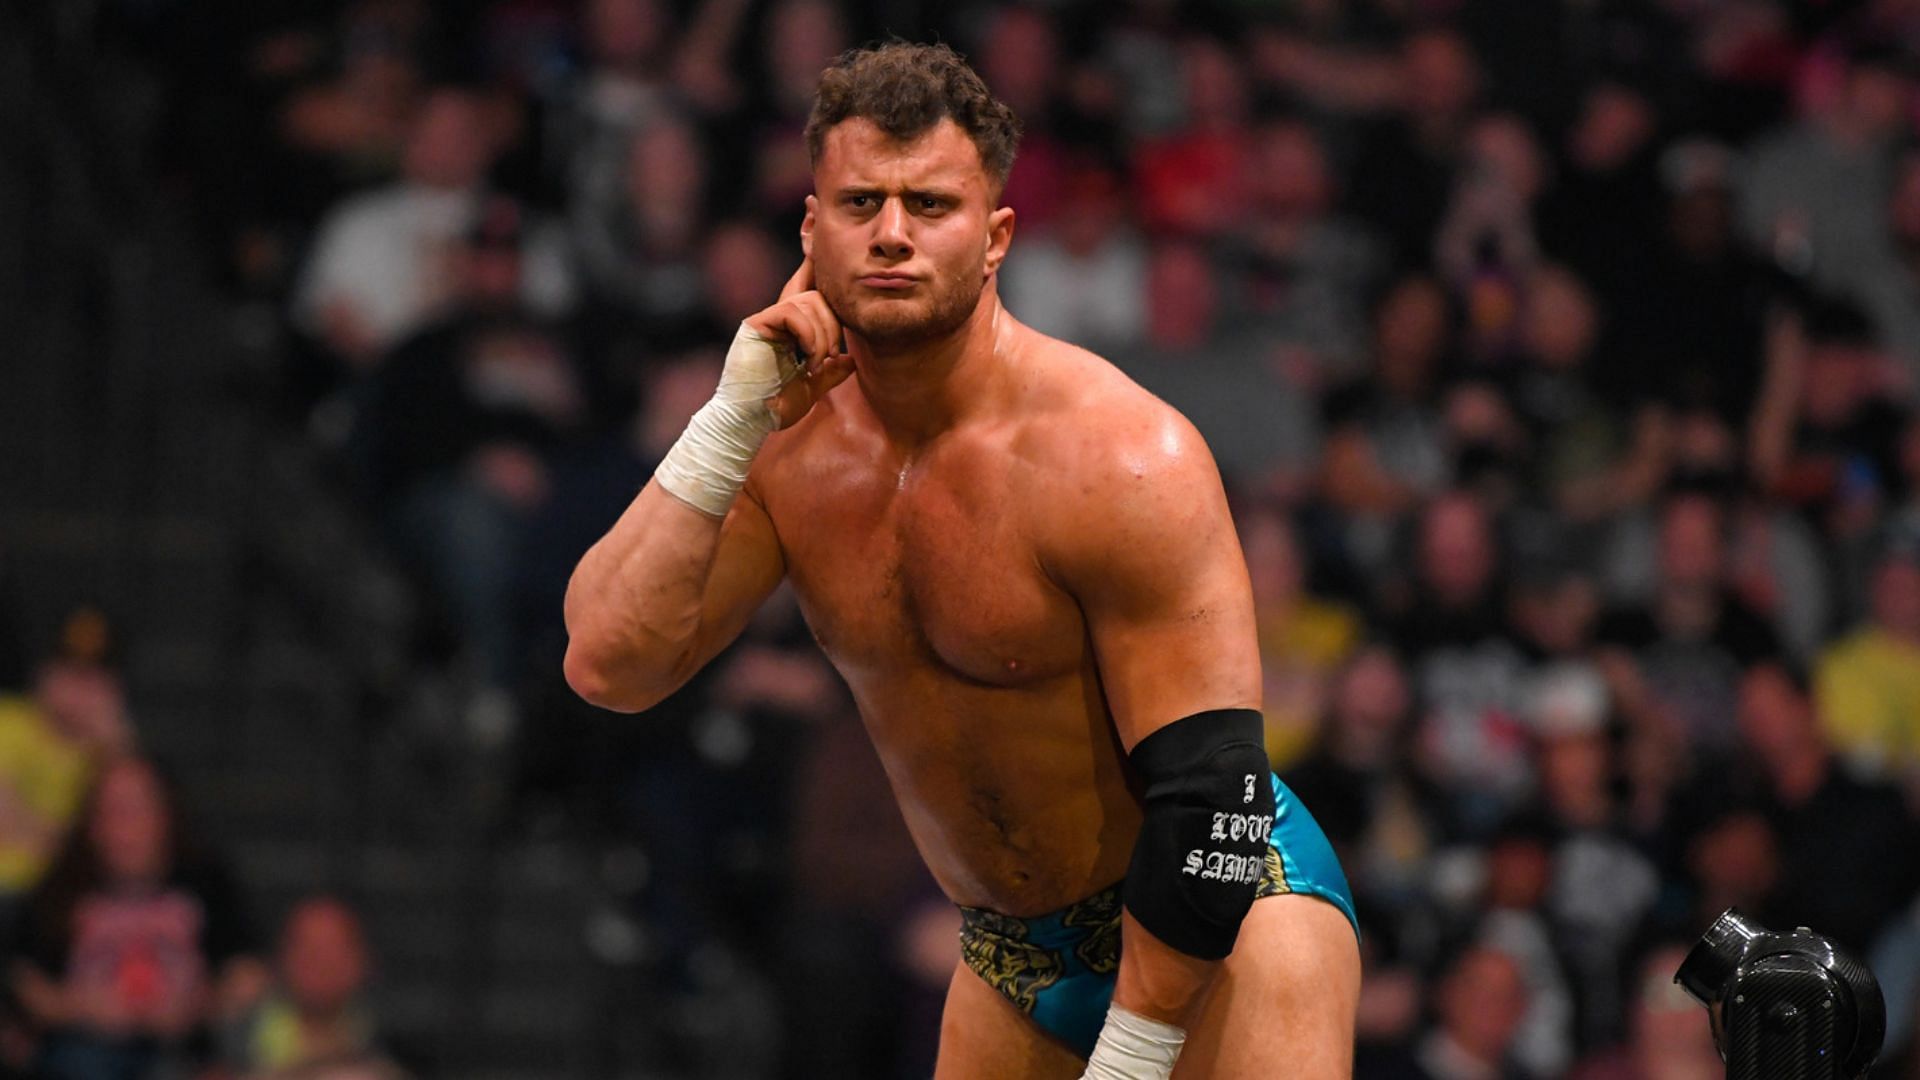 Could this be why MJF is facing this veteran?